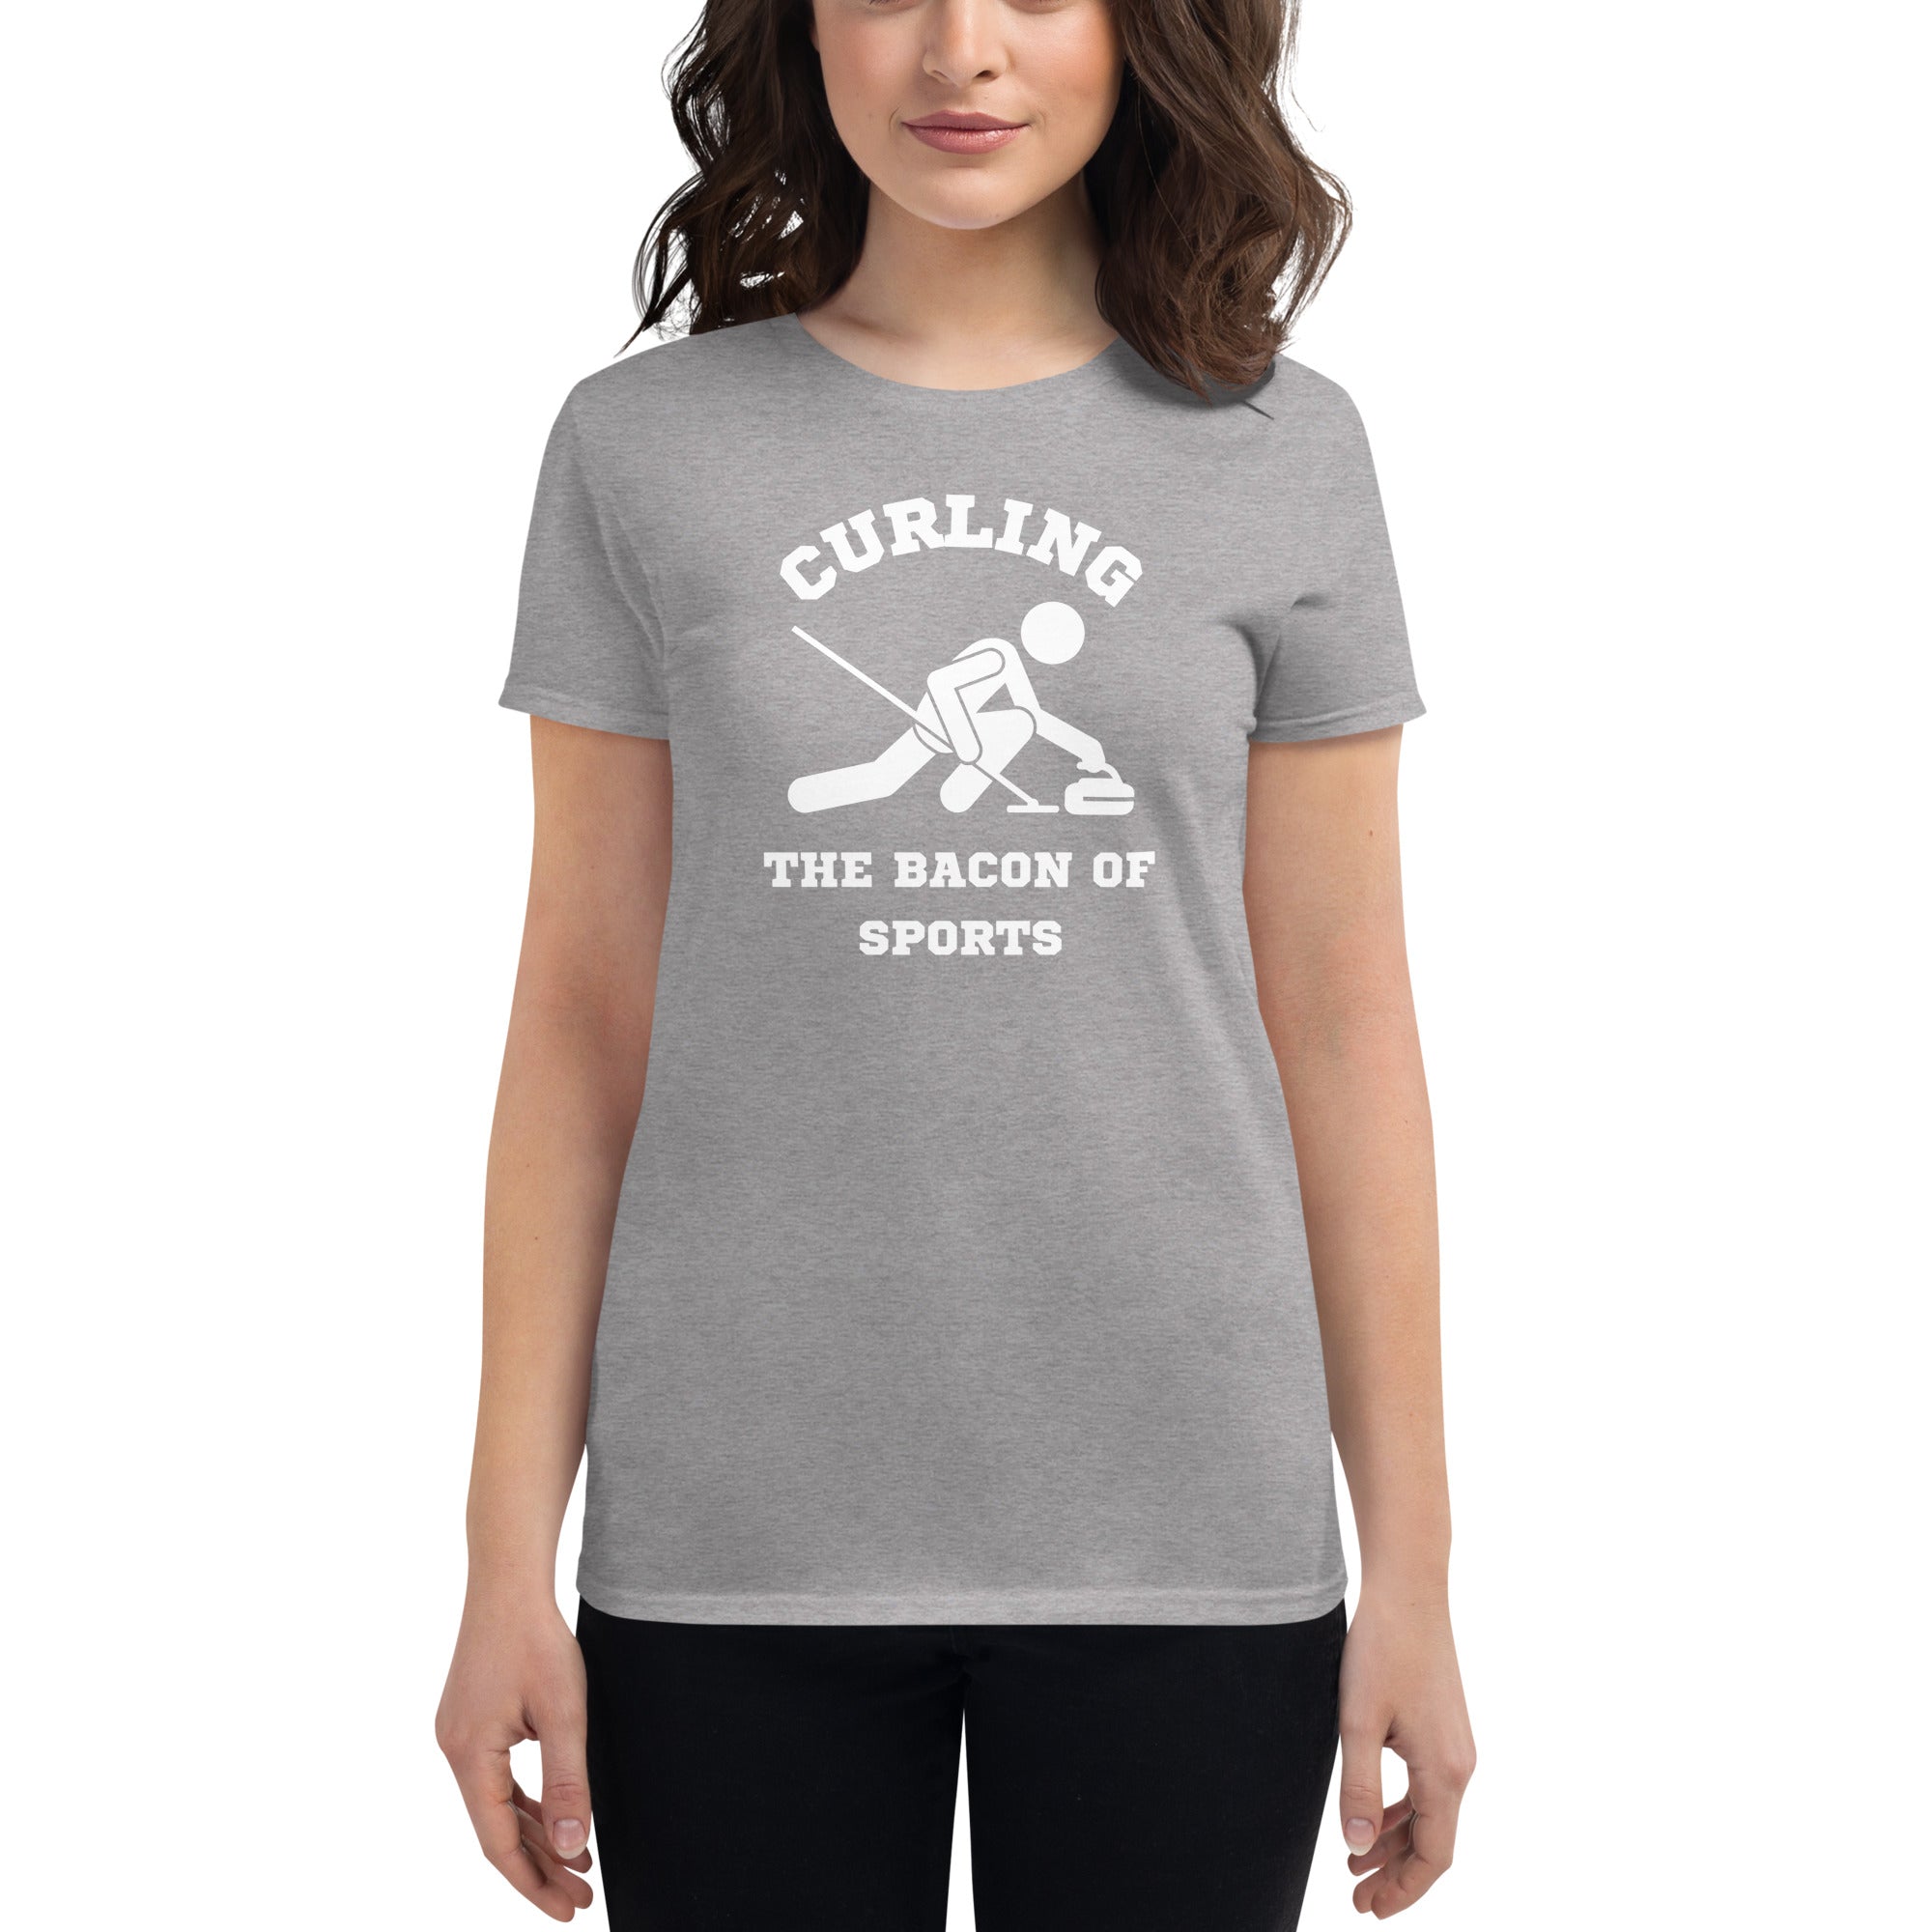 Curling The Bacon Of Sports Women's Fitted T-Shirt